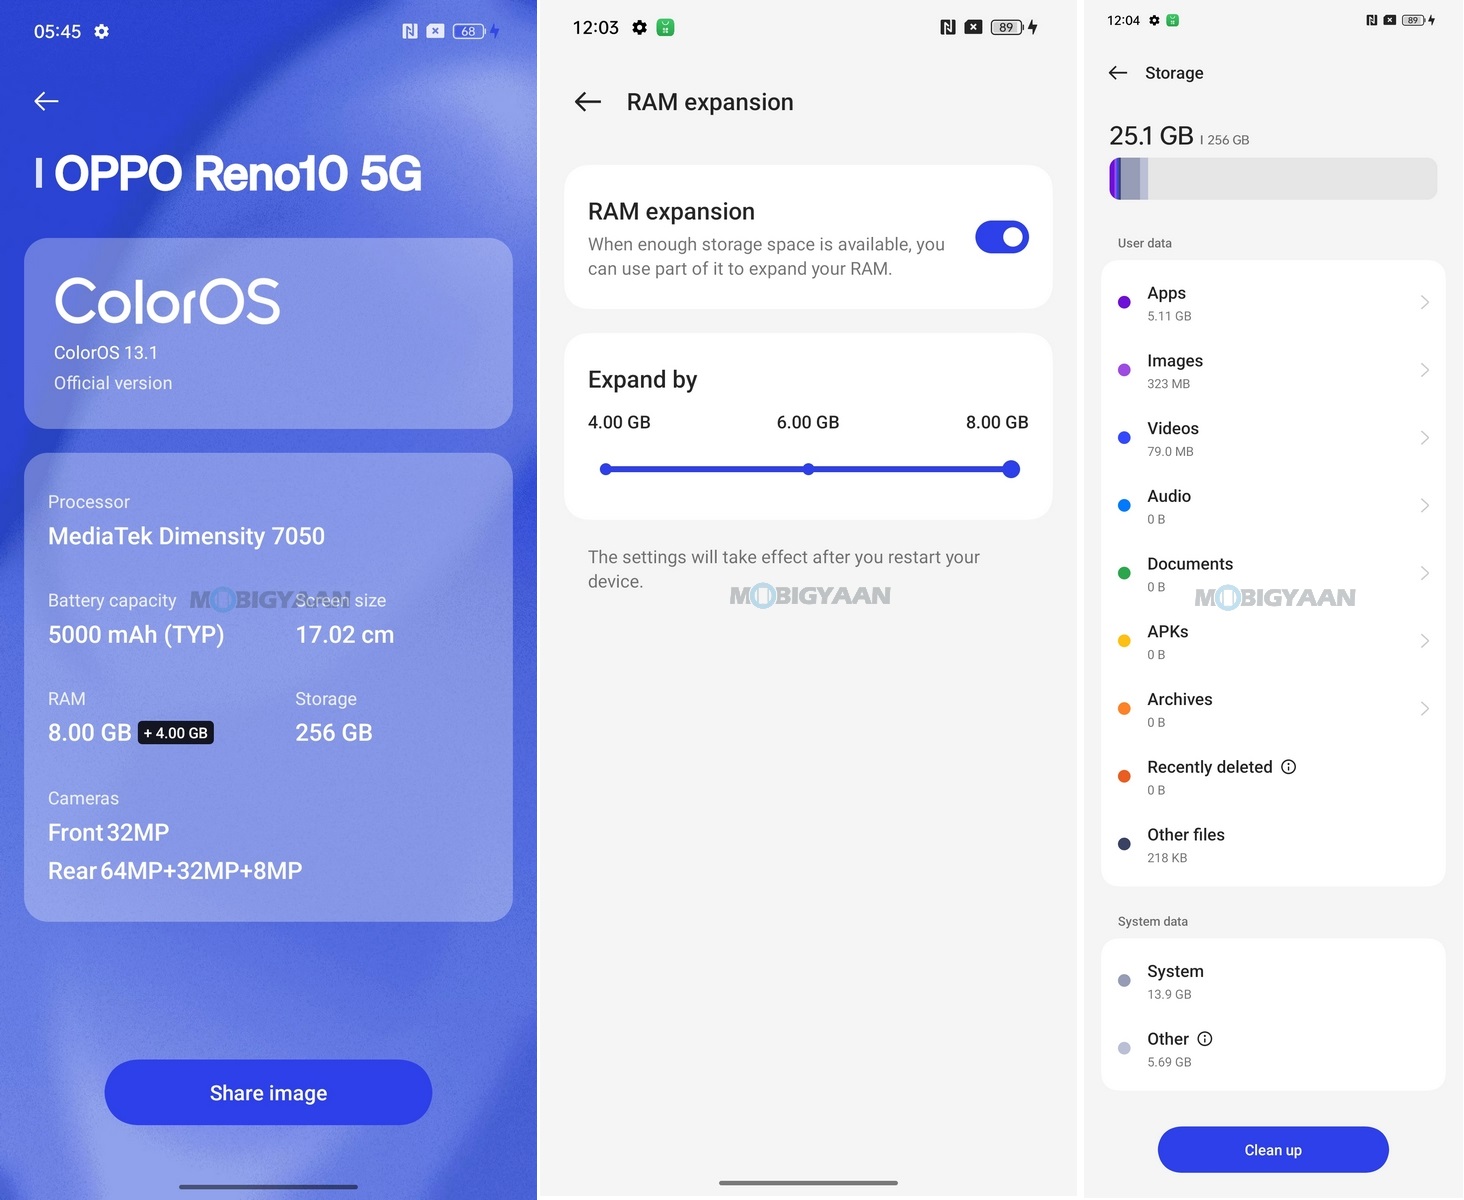 OPPO Reno10 5G Review ColorOS 13.1 About Specs RAM Storage